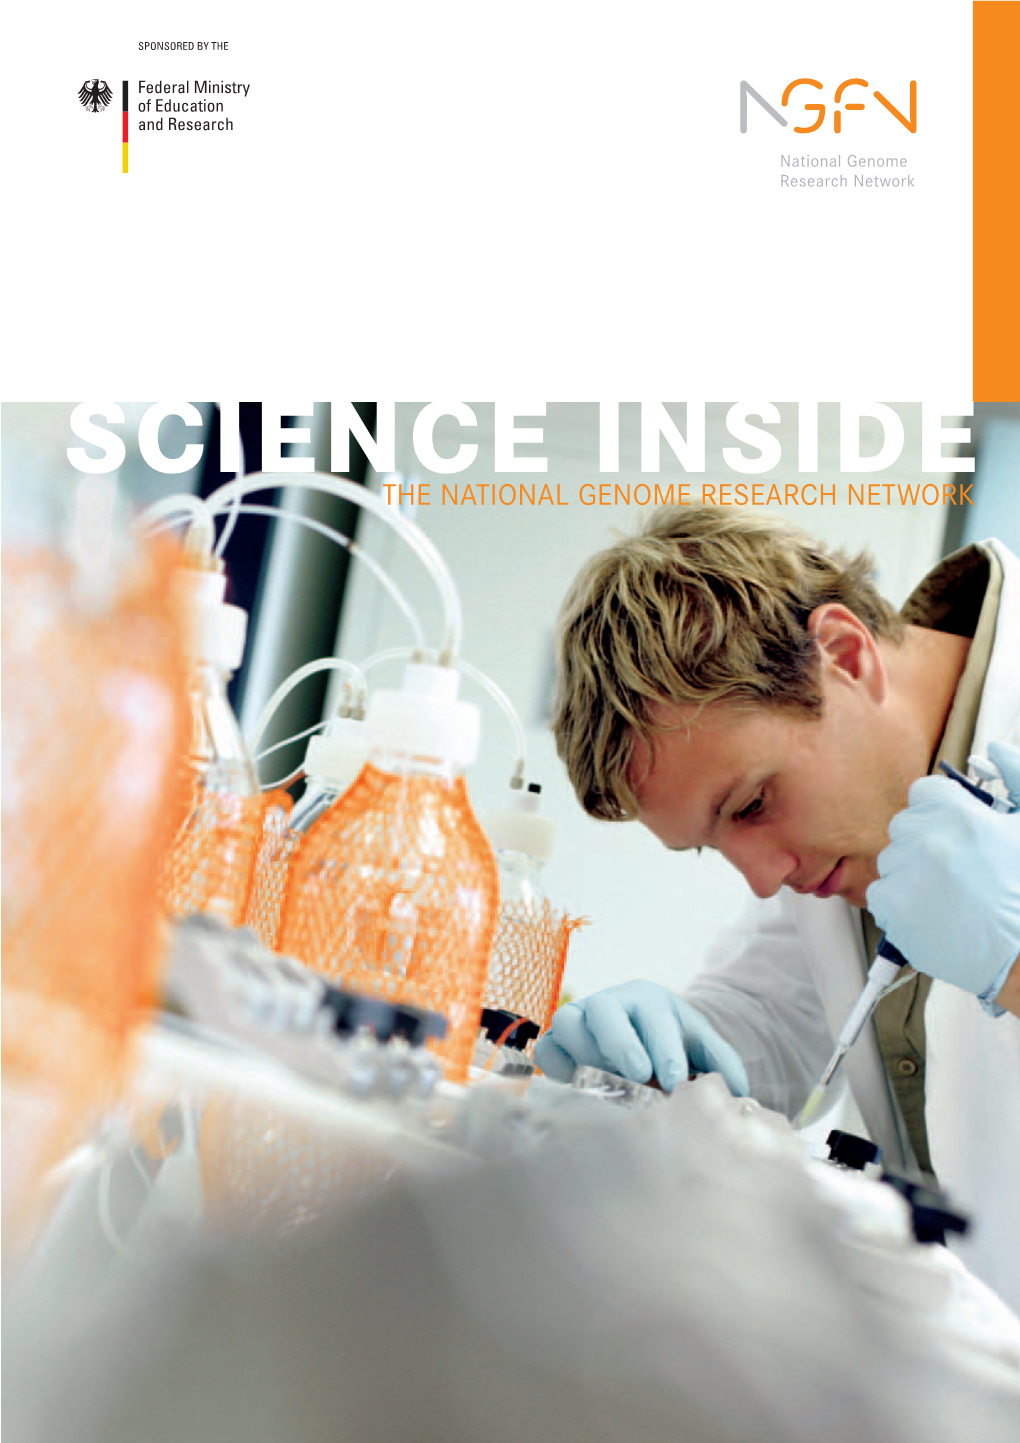 Science Inside – the National Genome Research Network